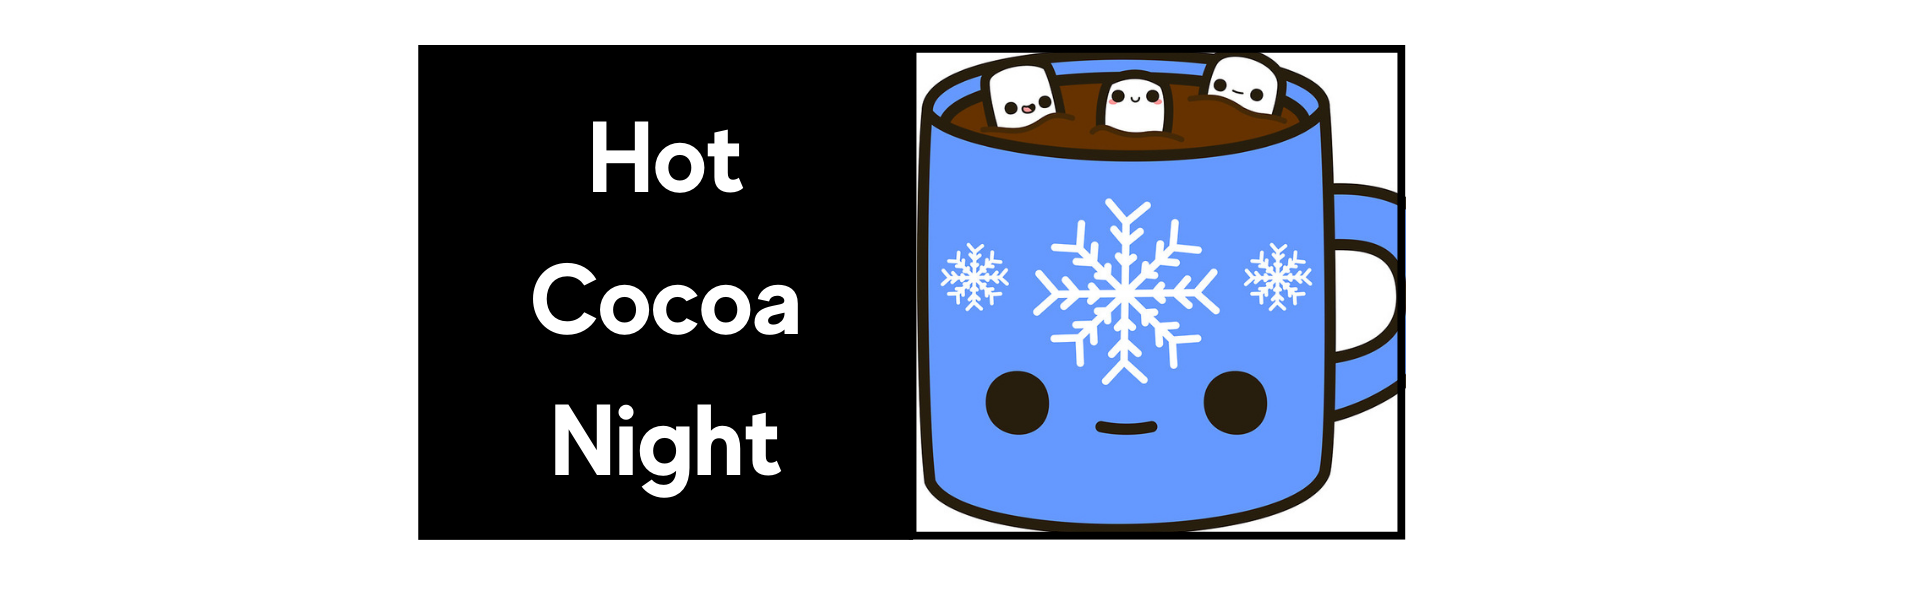 Hot-Cocoa-Night.png